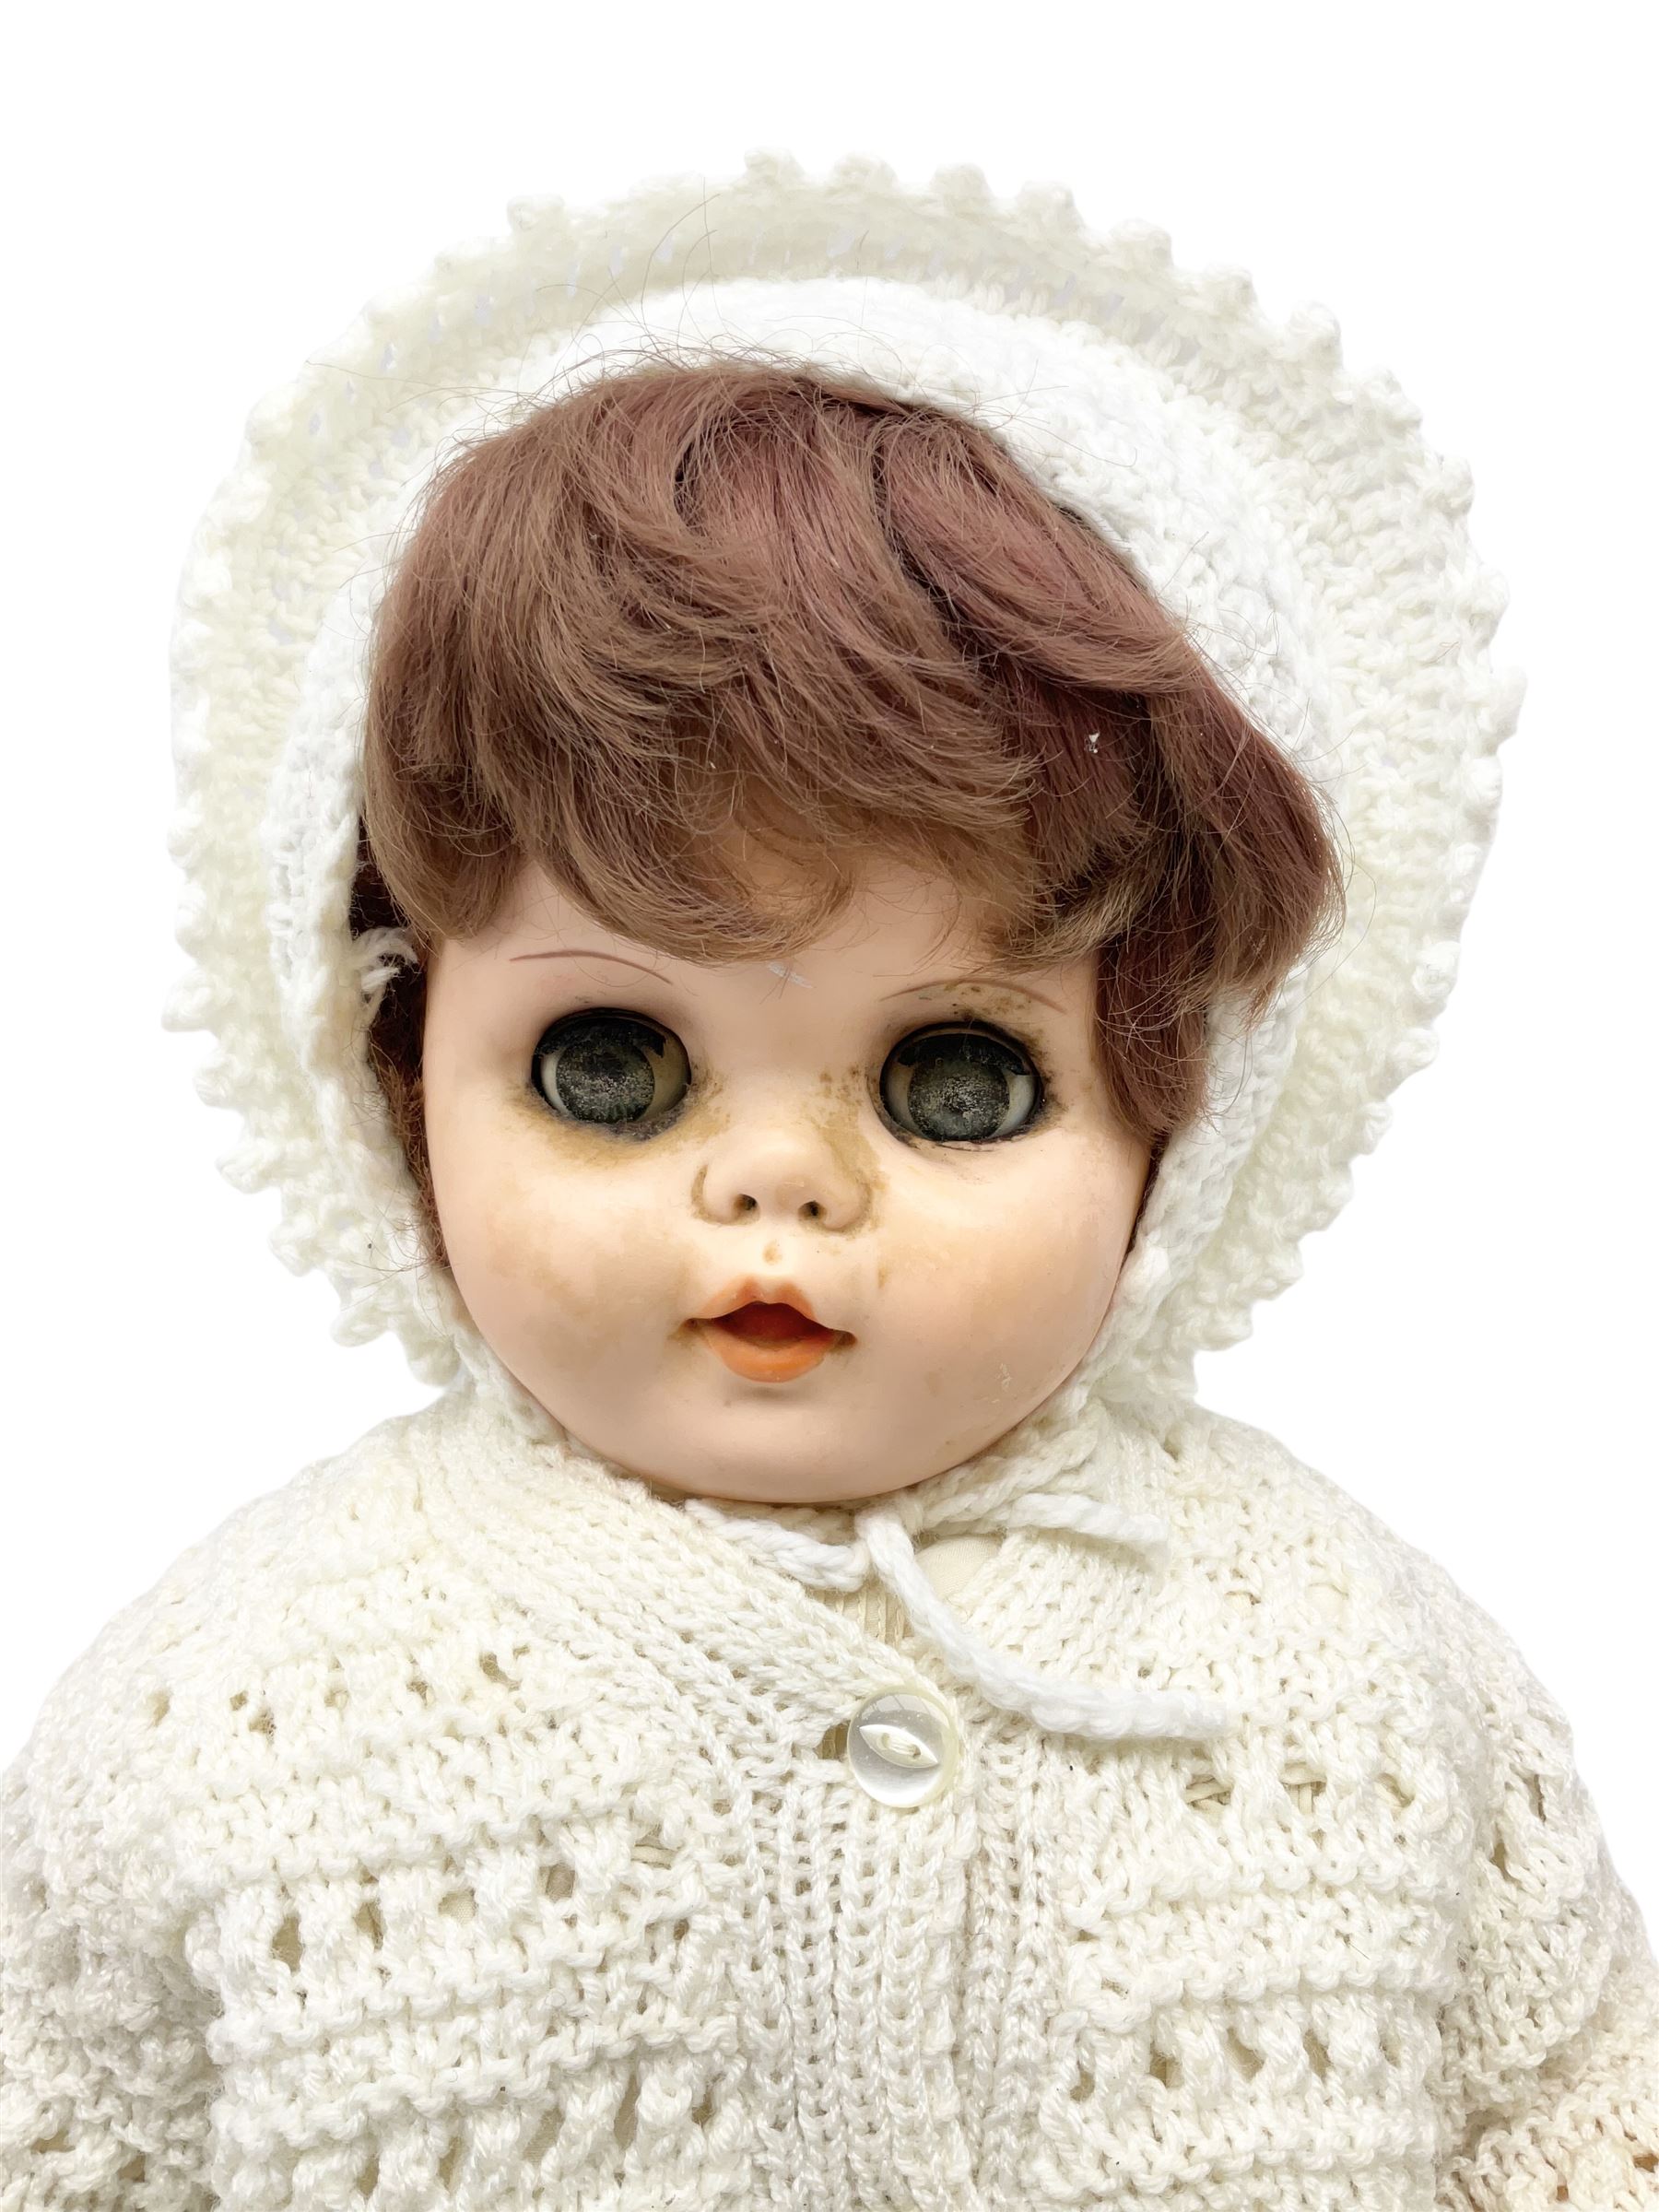 Simon & Halbig for Kammer & Reinhardt bisque head doll with applied hair - Image 4 of 11